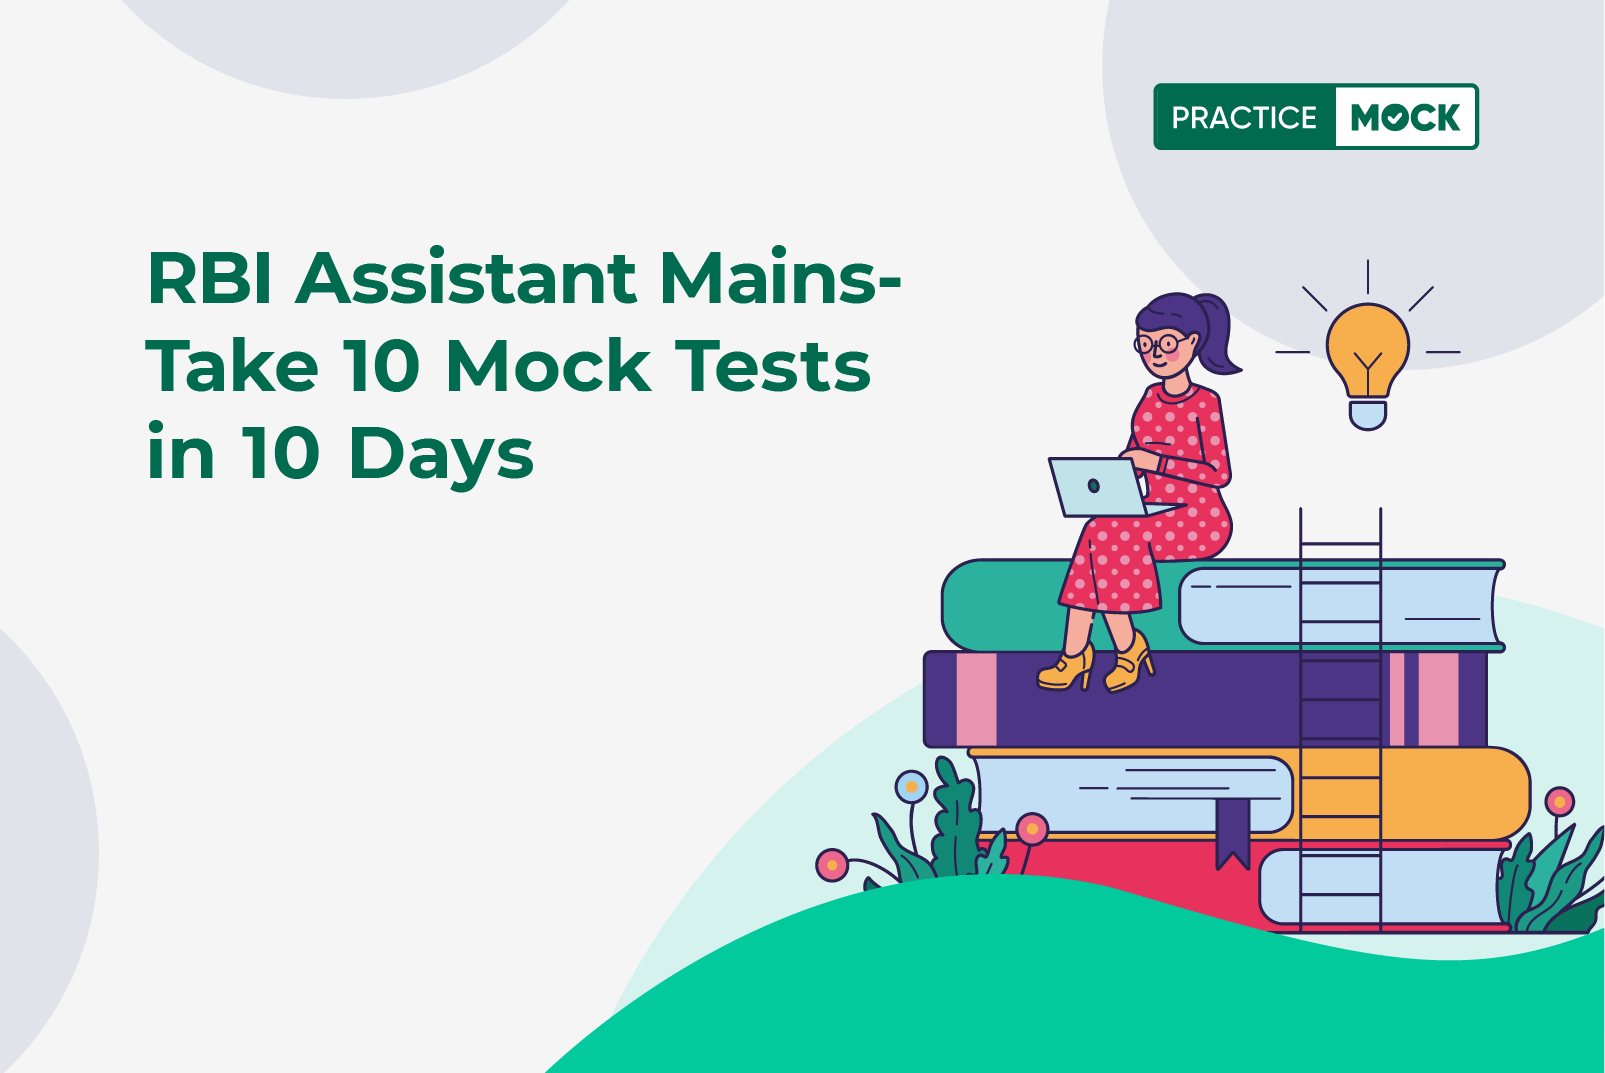 RBI Assistant Mains- Take 10 Mock Tests in 10 Days